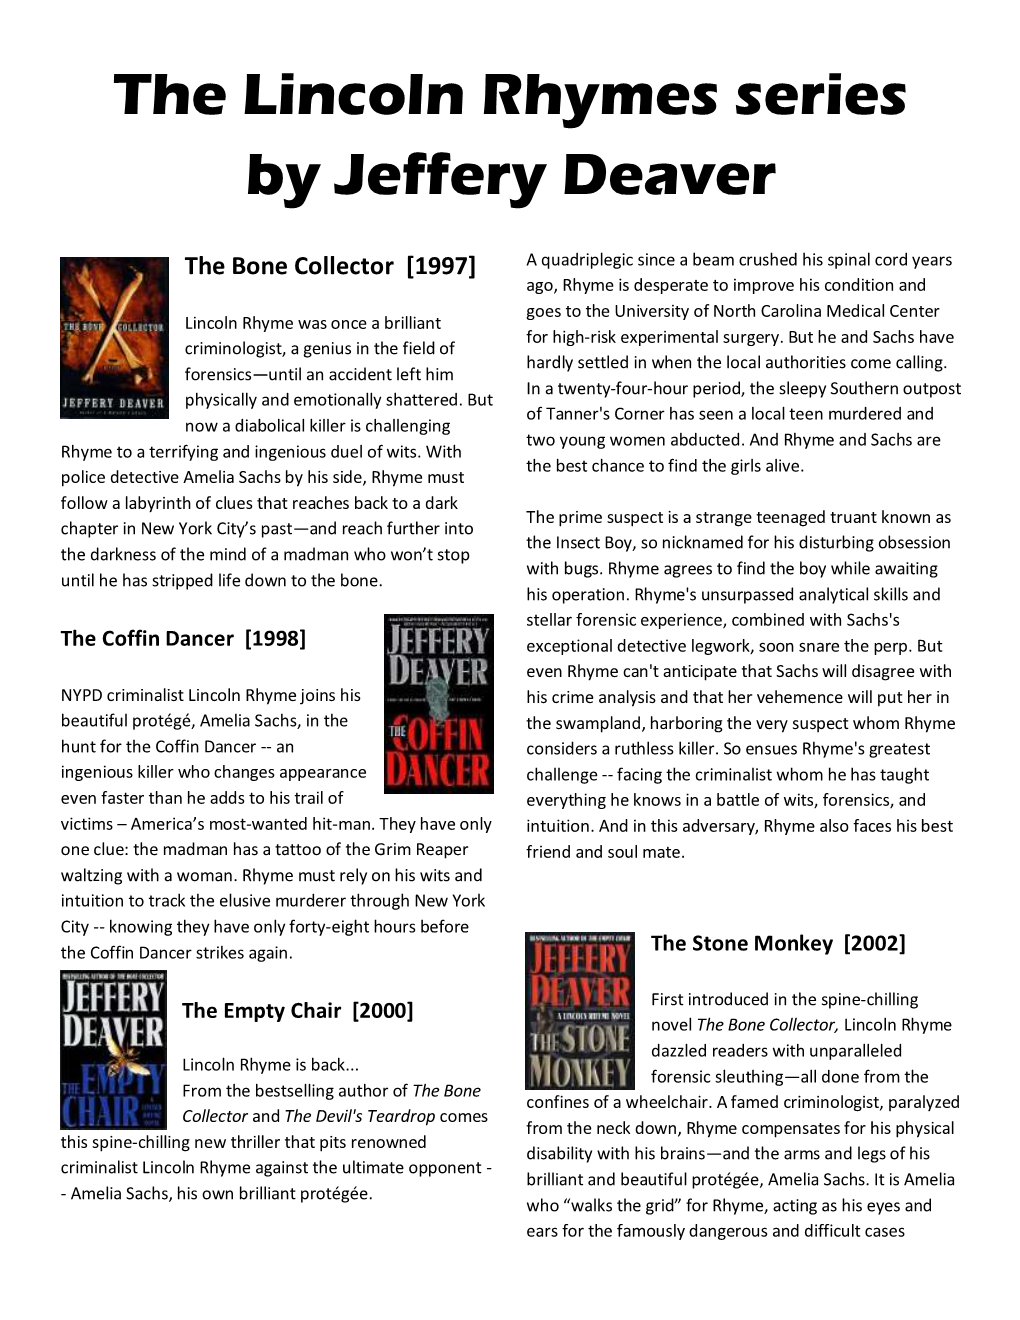 The Lincoln Rhymes Series by Jeffery Deaver The